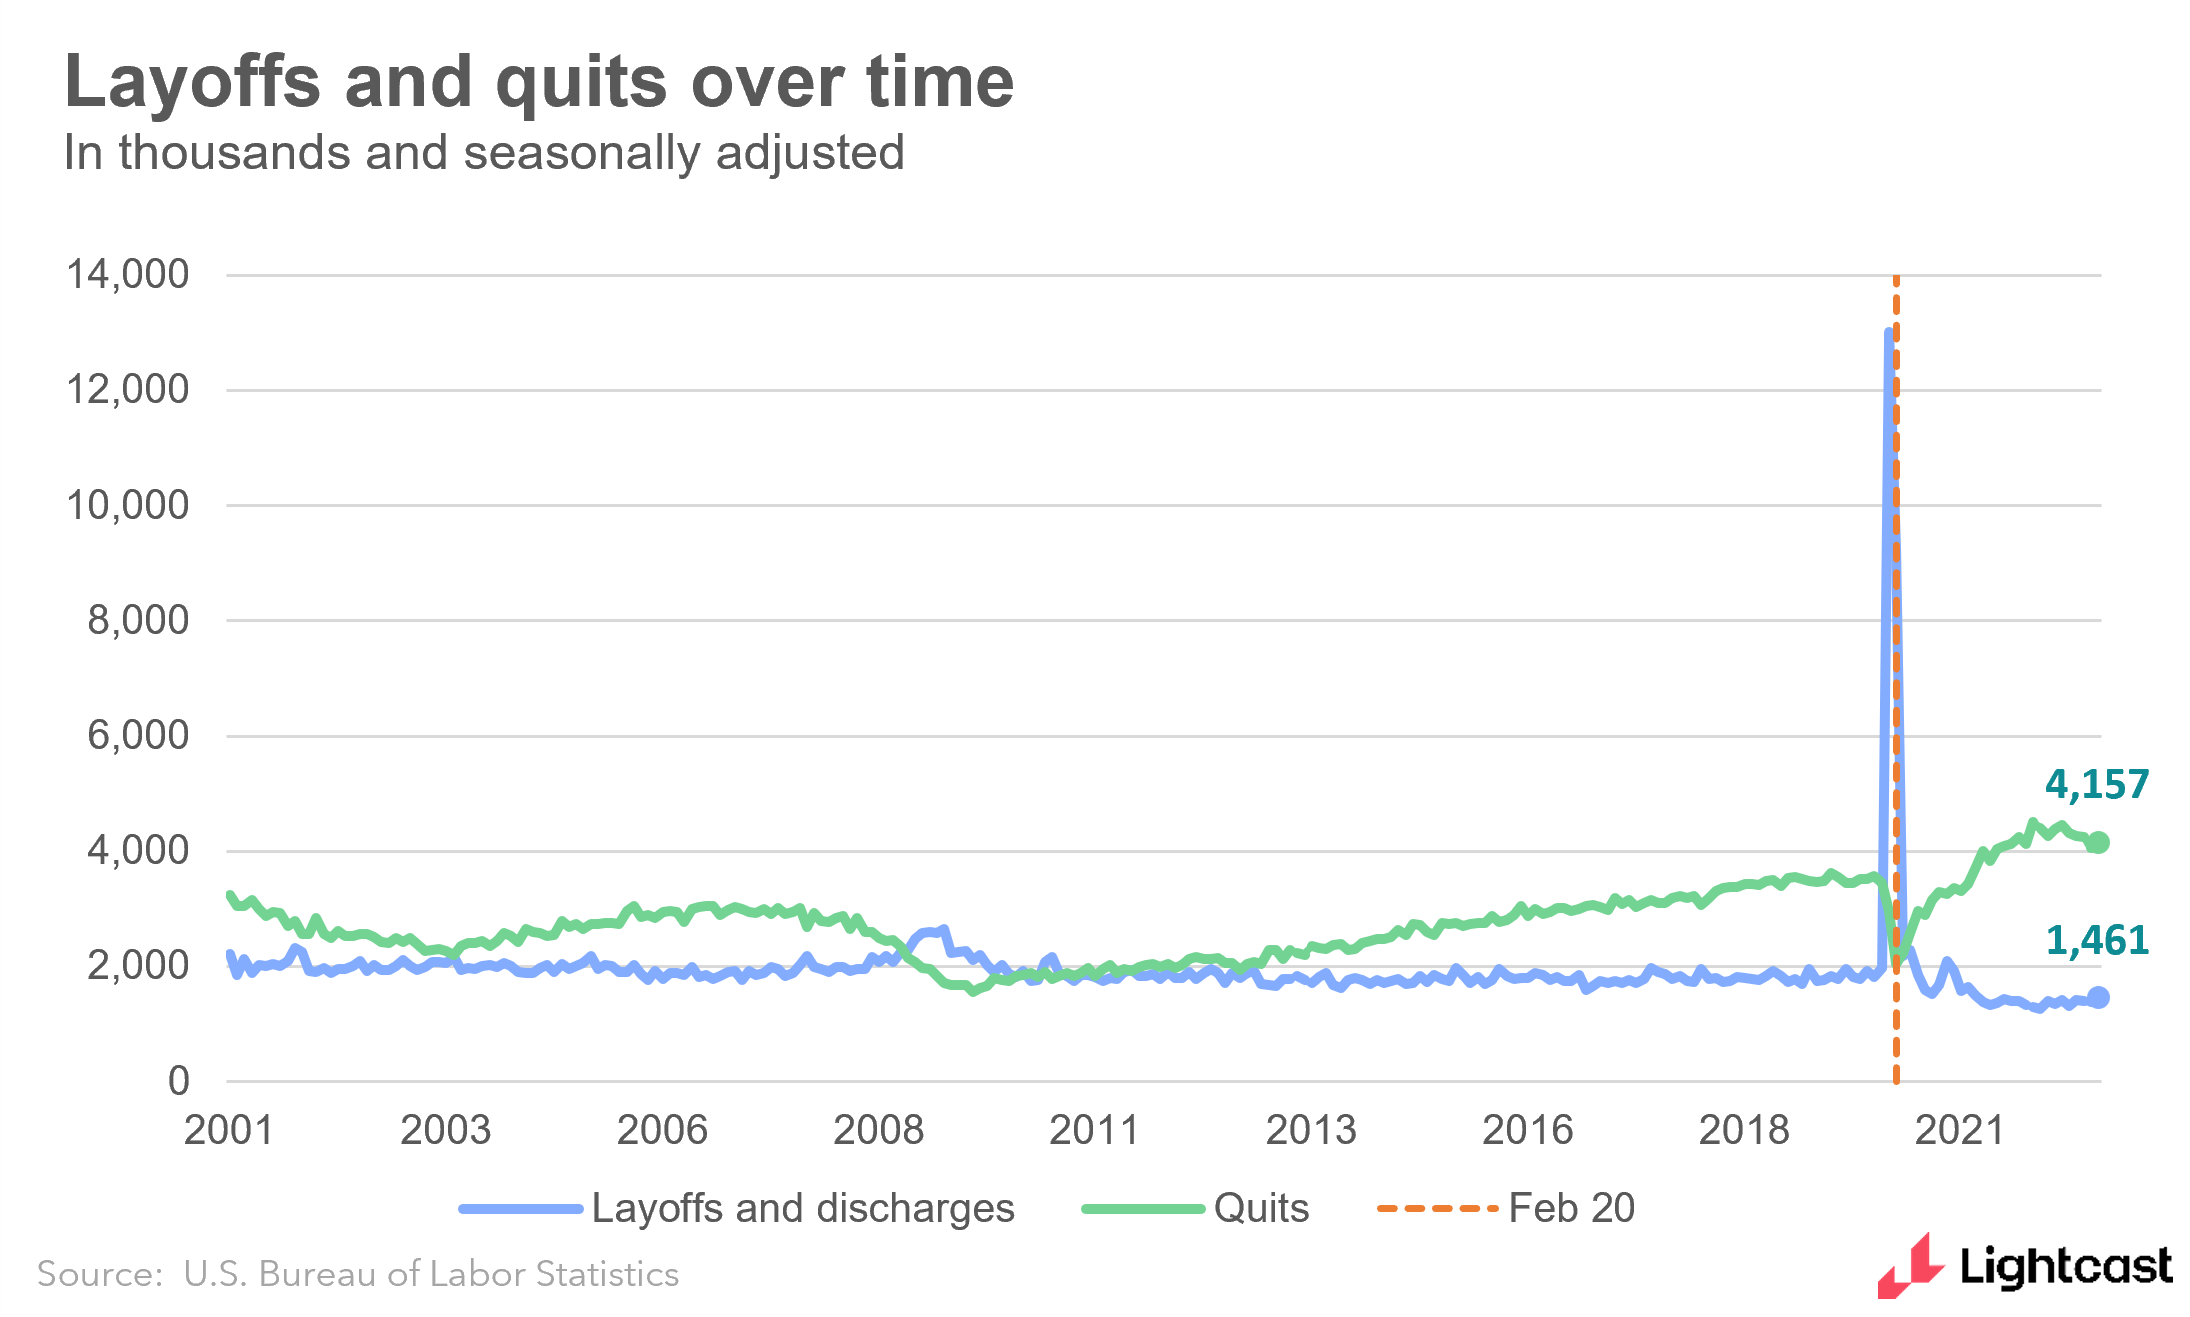 bar chart showing layoffs and quits over time